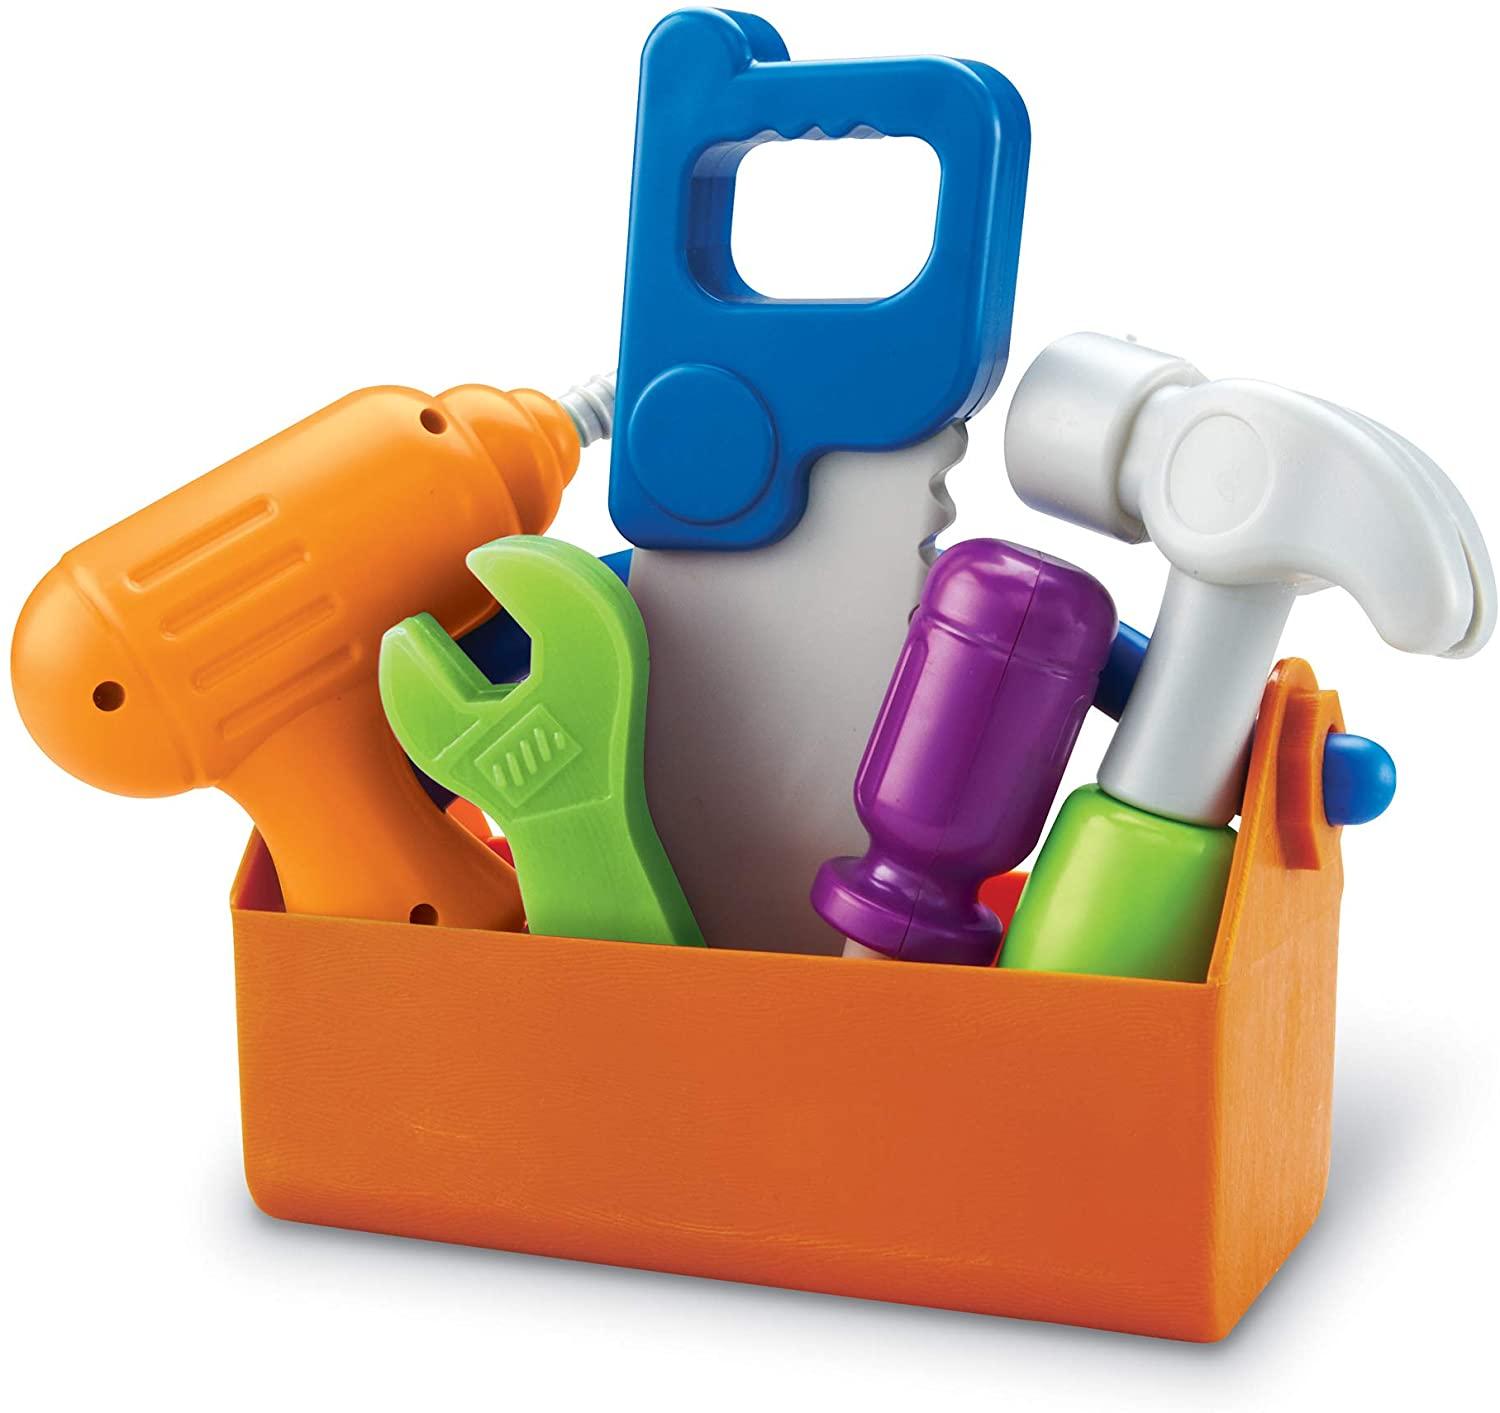 6-Piece Learning Resources New Sprouts Fix It Toy Tool Set for $12.95